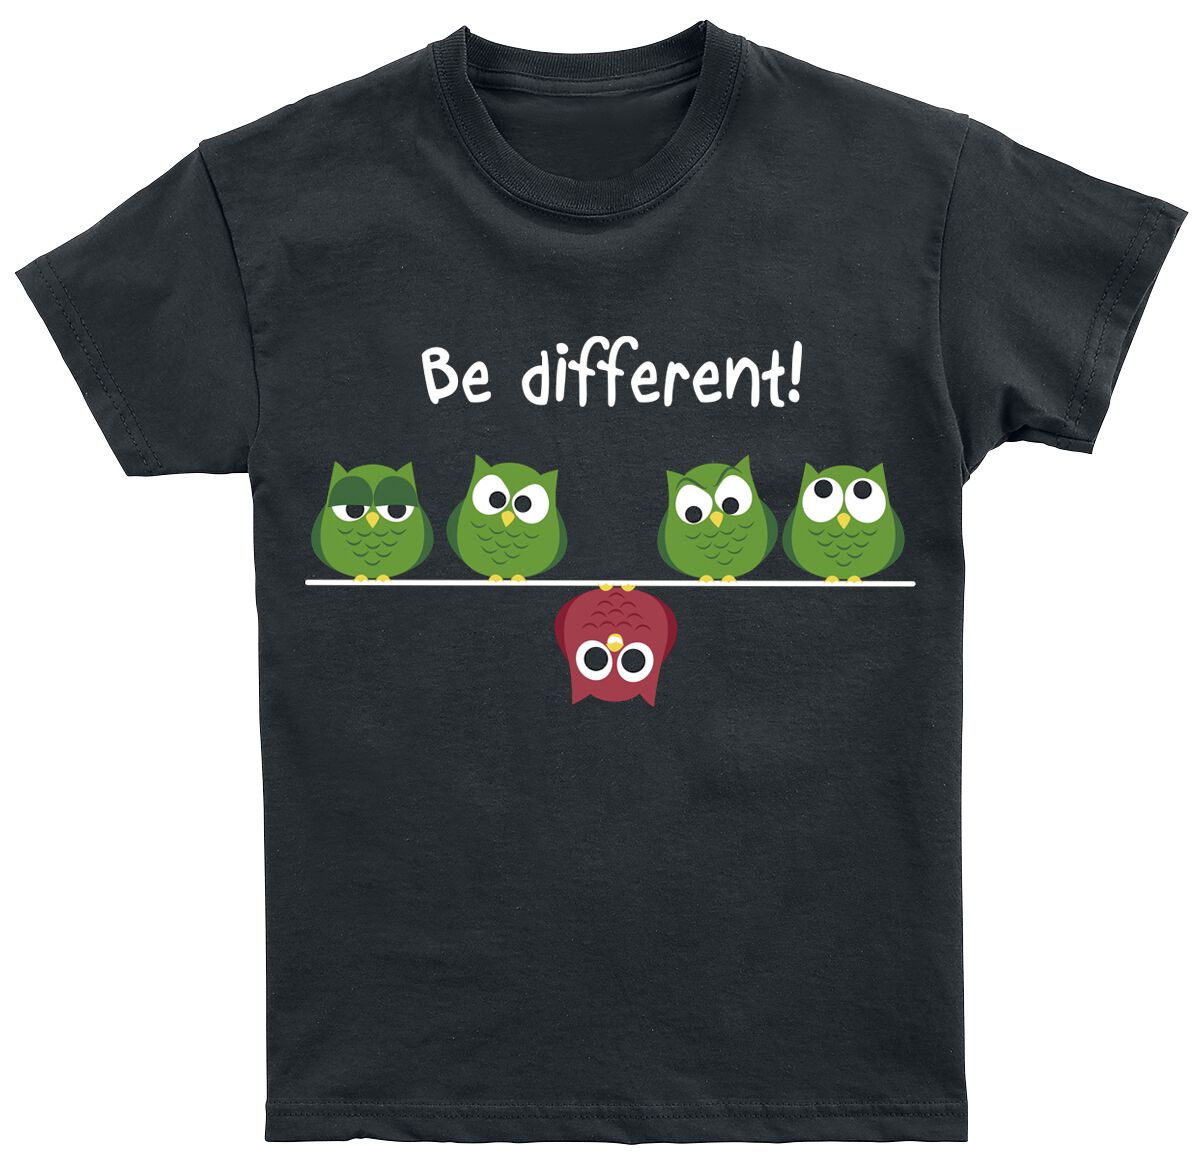 Be Different! Kids - Be Different! T-Shirt schwarz in 116